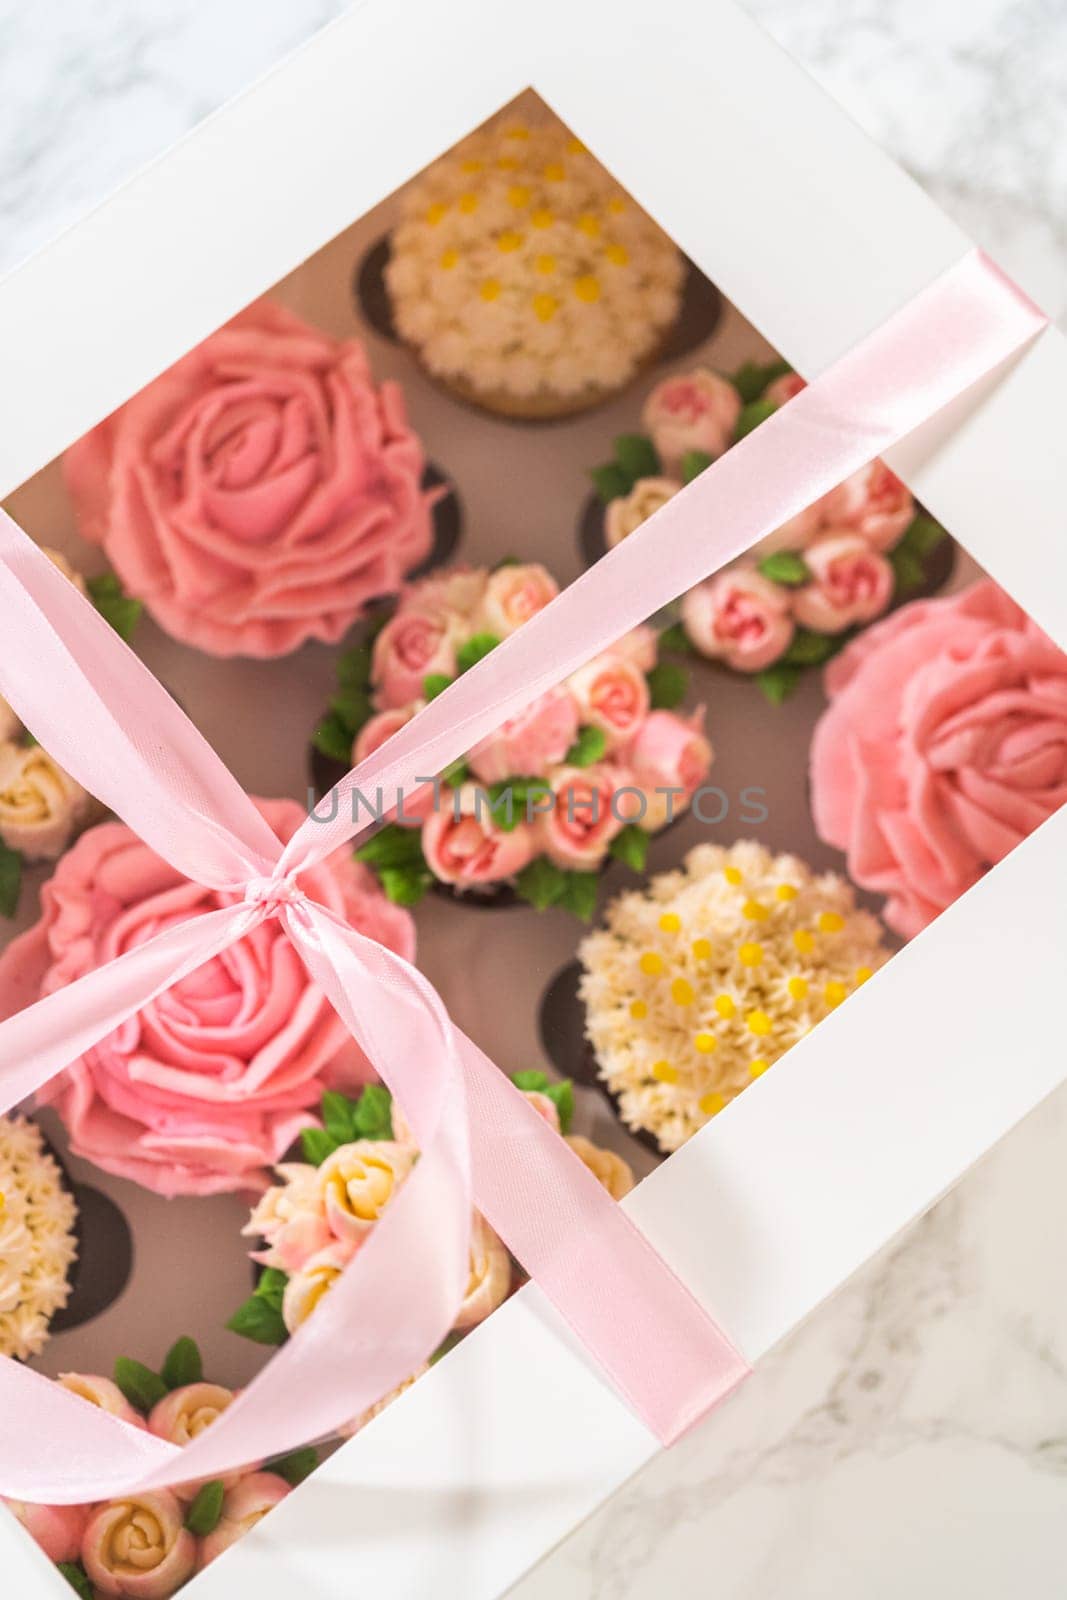 Encased in a pristine white paper cupcake box, each gourmet cupcake is a work of art, adorned with buttercream frosting flowers beautifully designed to resemble vibrant roses and tulips.